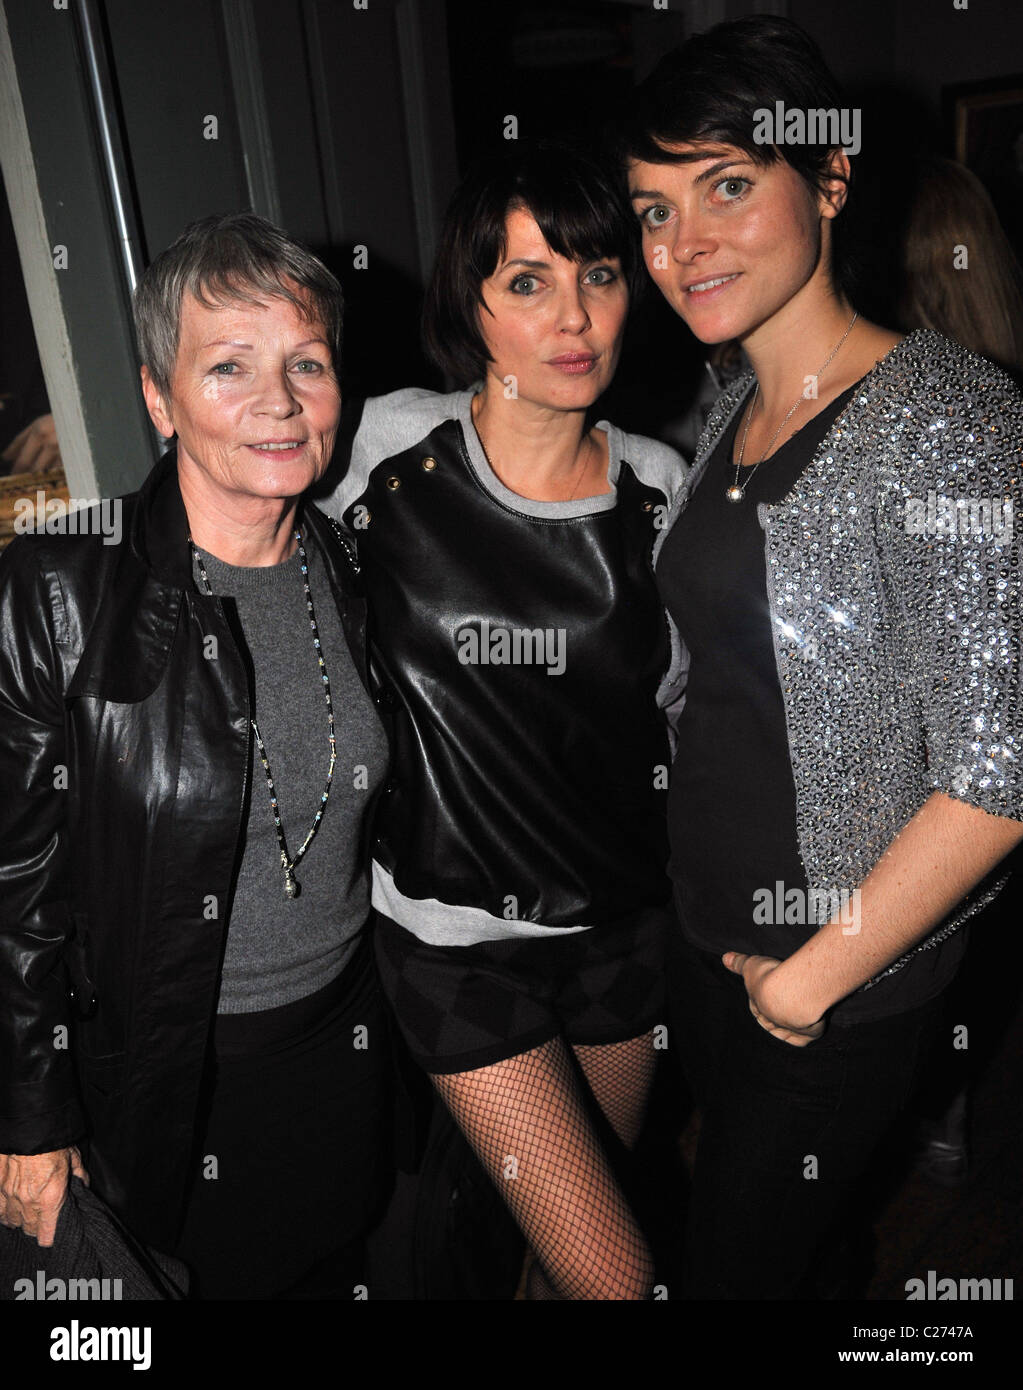 Mary Davidson, Sadie Frost and Holly Davidson Get Tested! charity performance held at The Paradise Club. London, England - Stock Photo